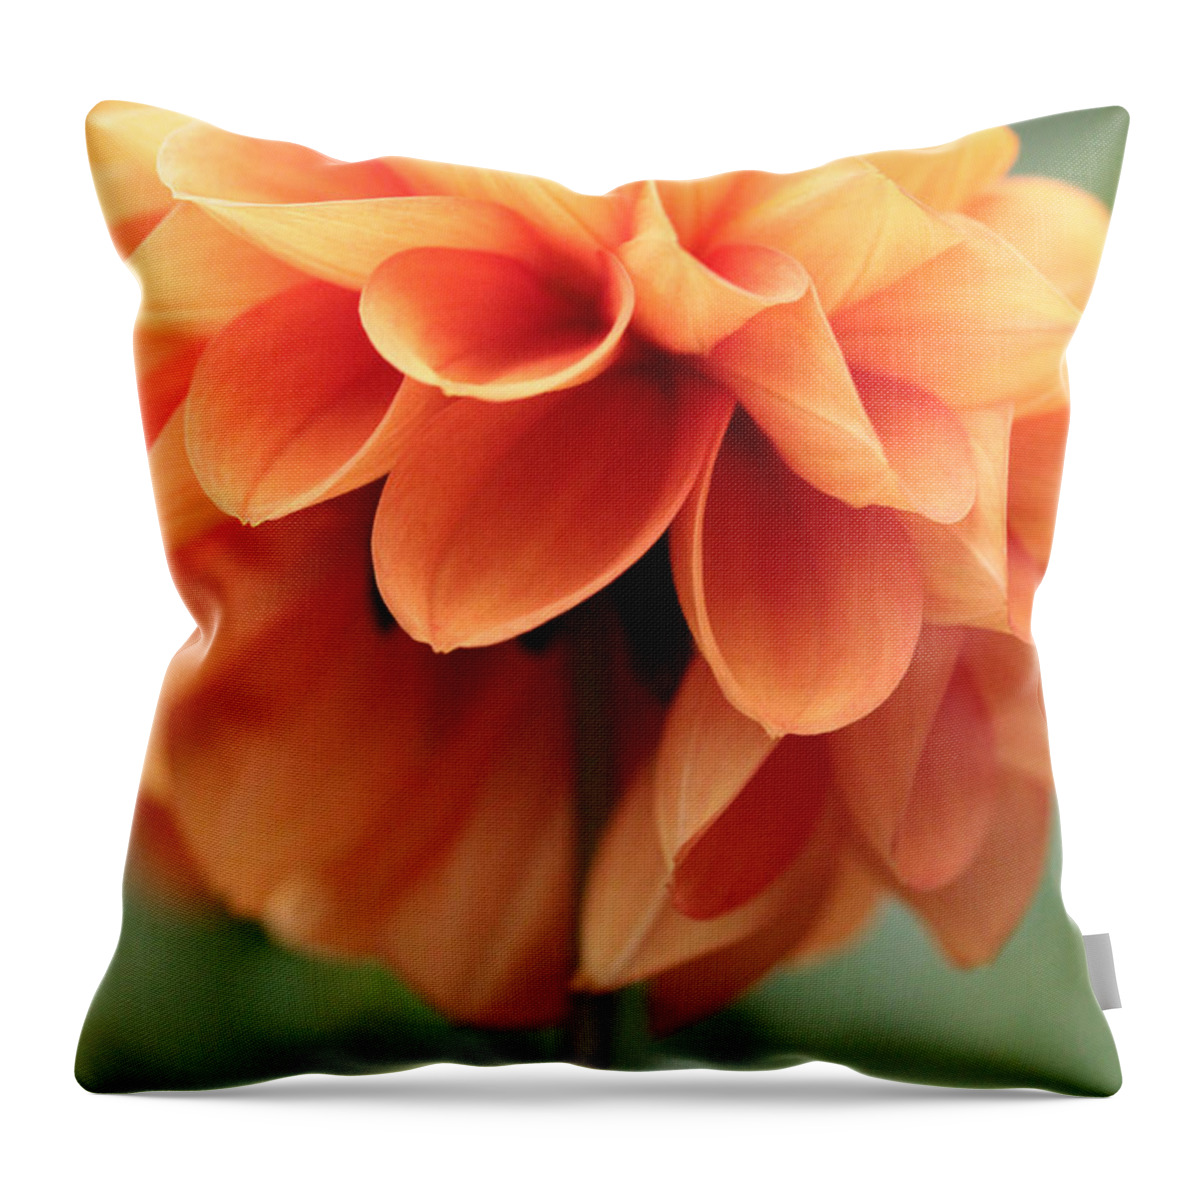 Dahlia Throw Pillow featuring the photograph Ballerina by Connie Handscomb